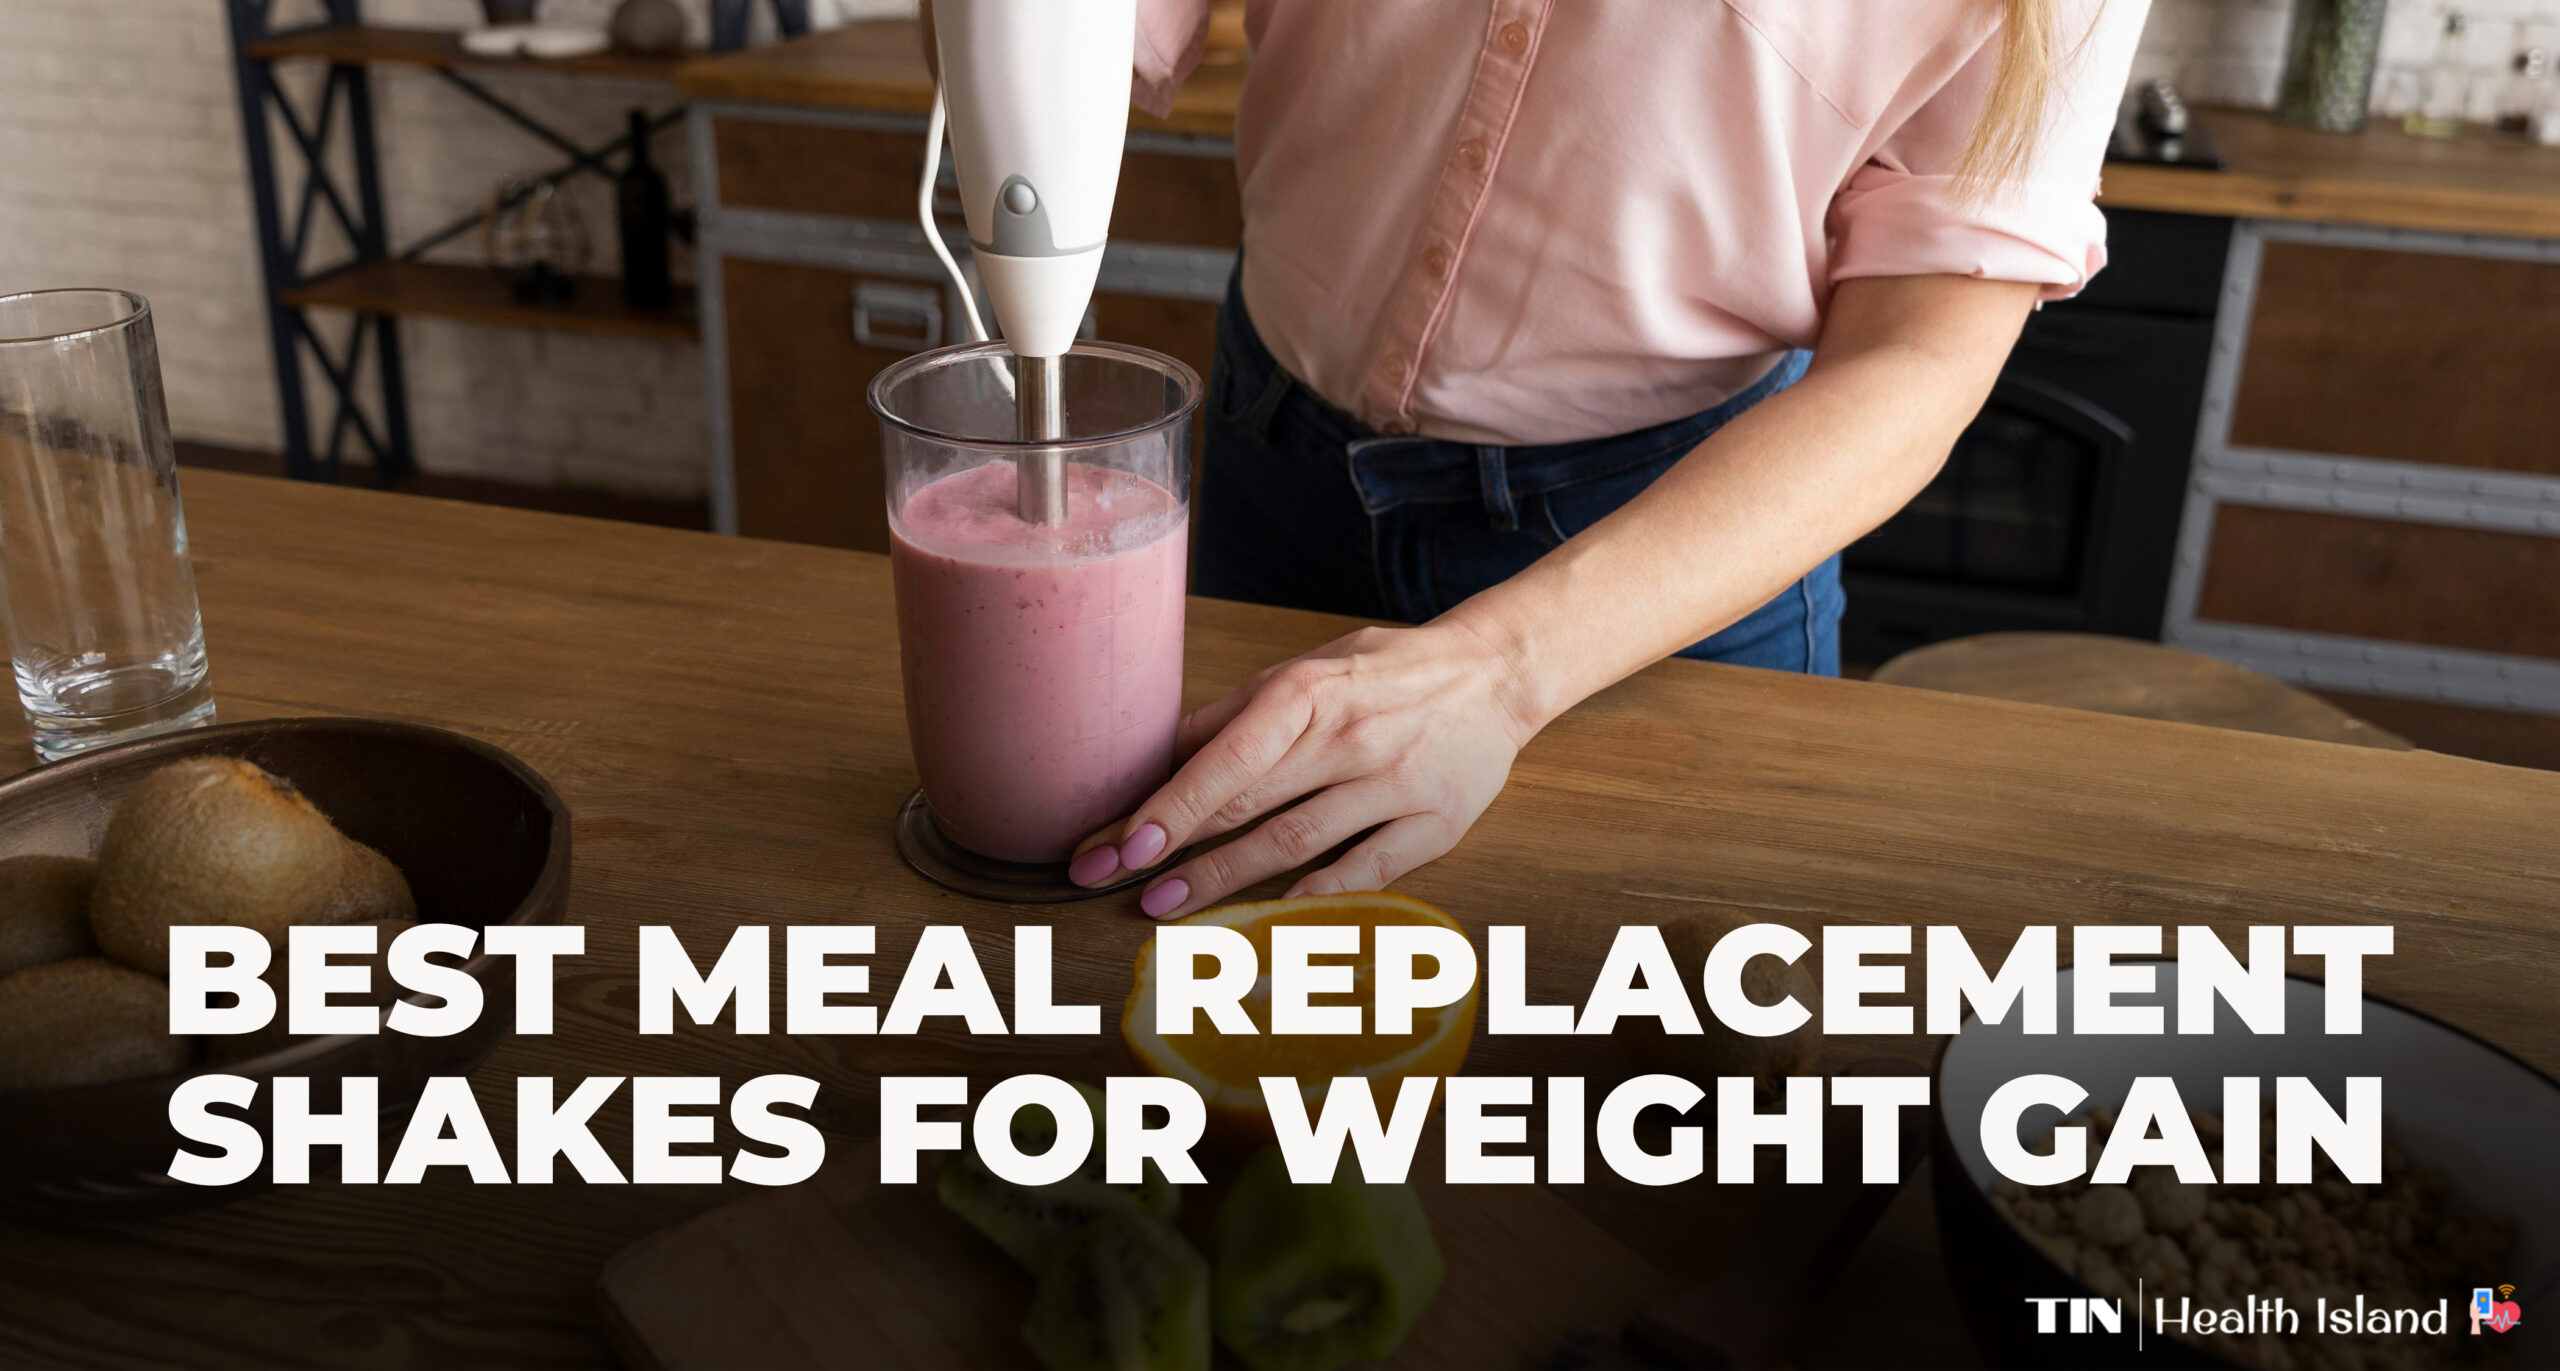 6 Best Meal Replacement Shakes For Weight Gain